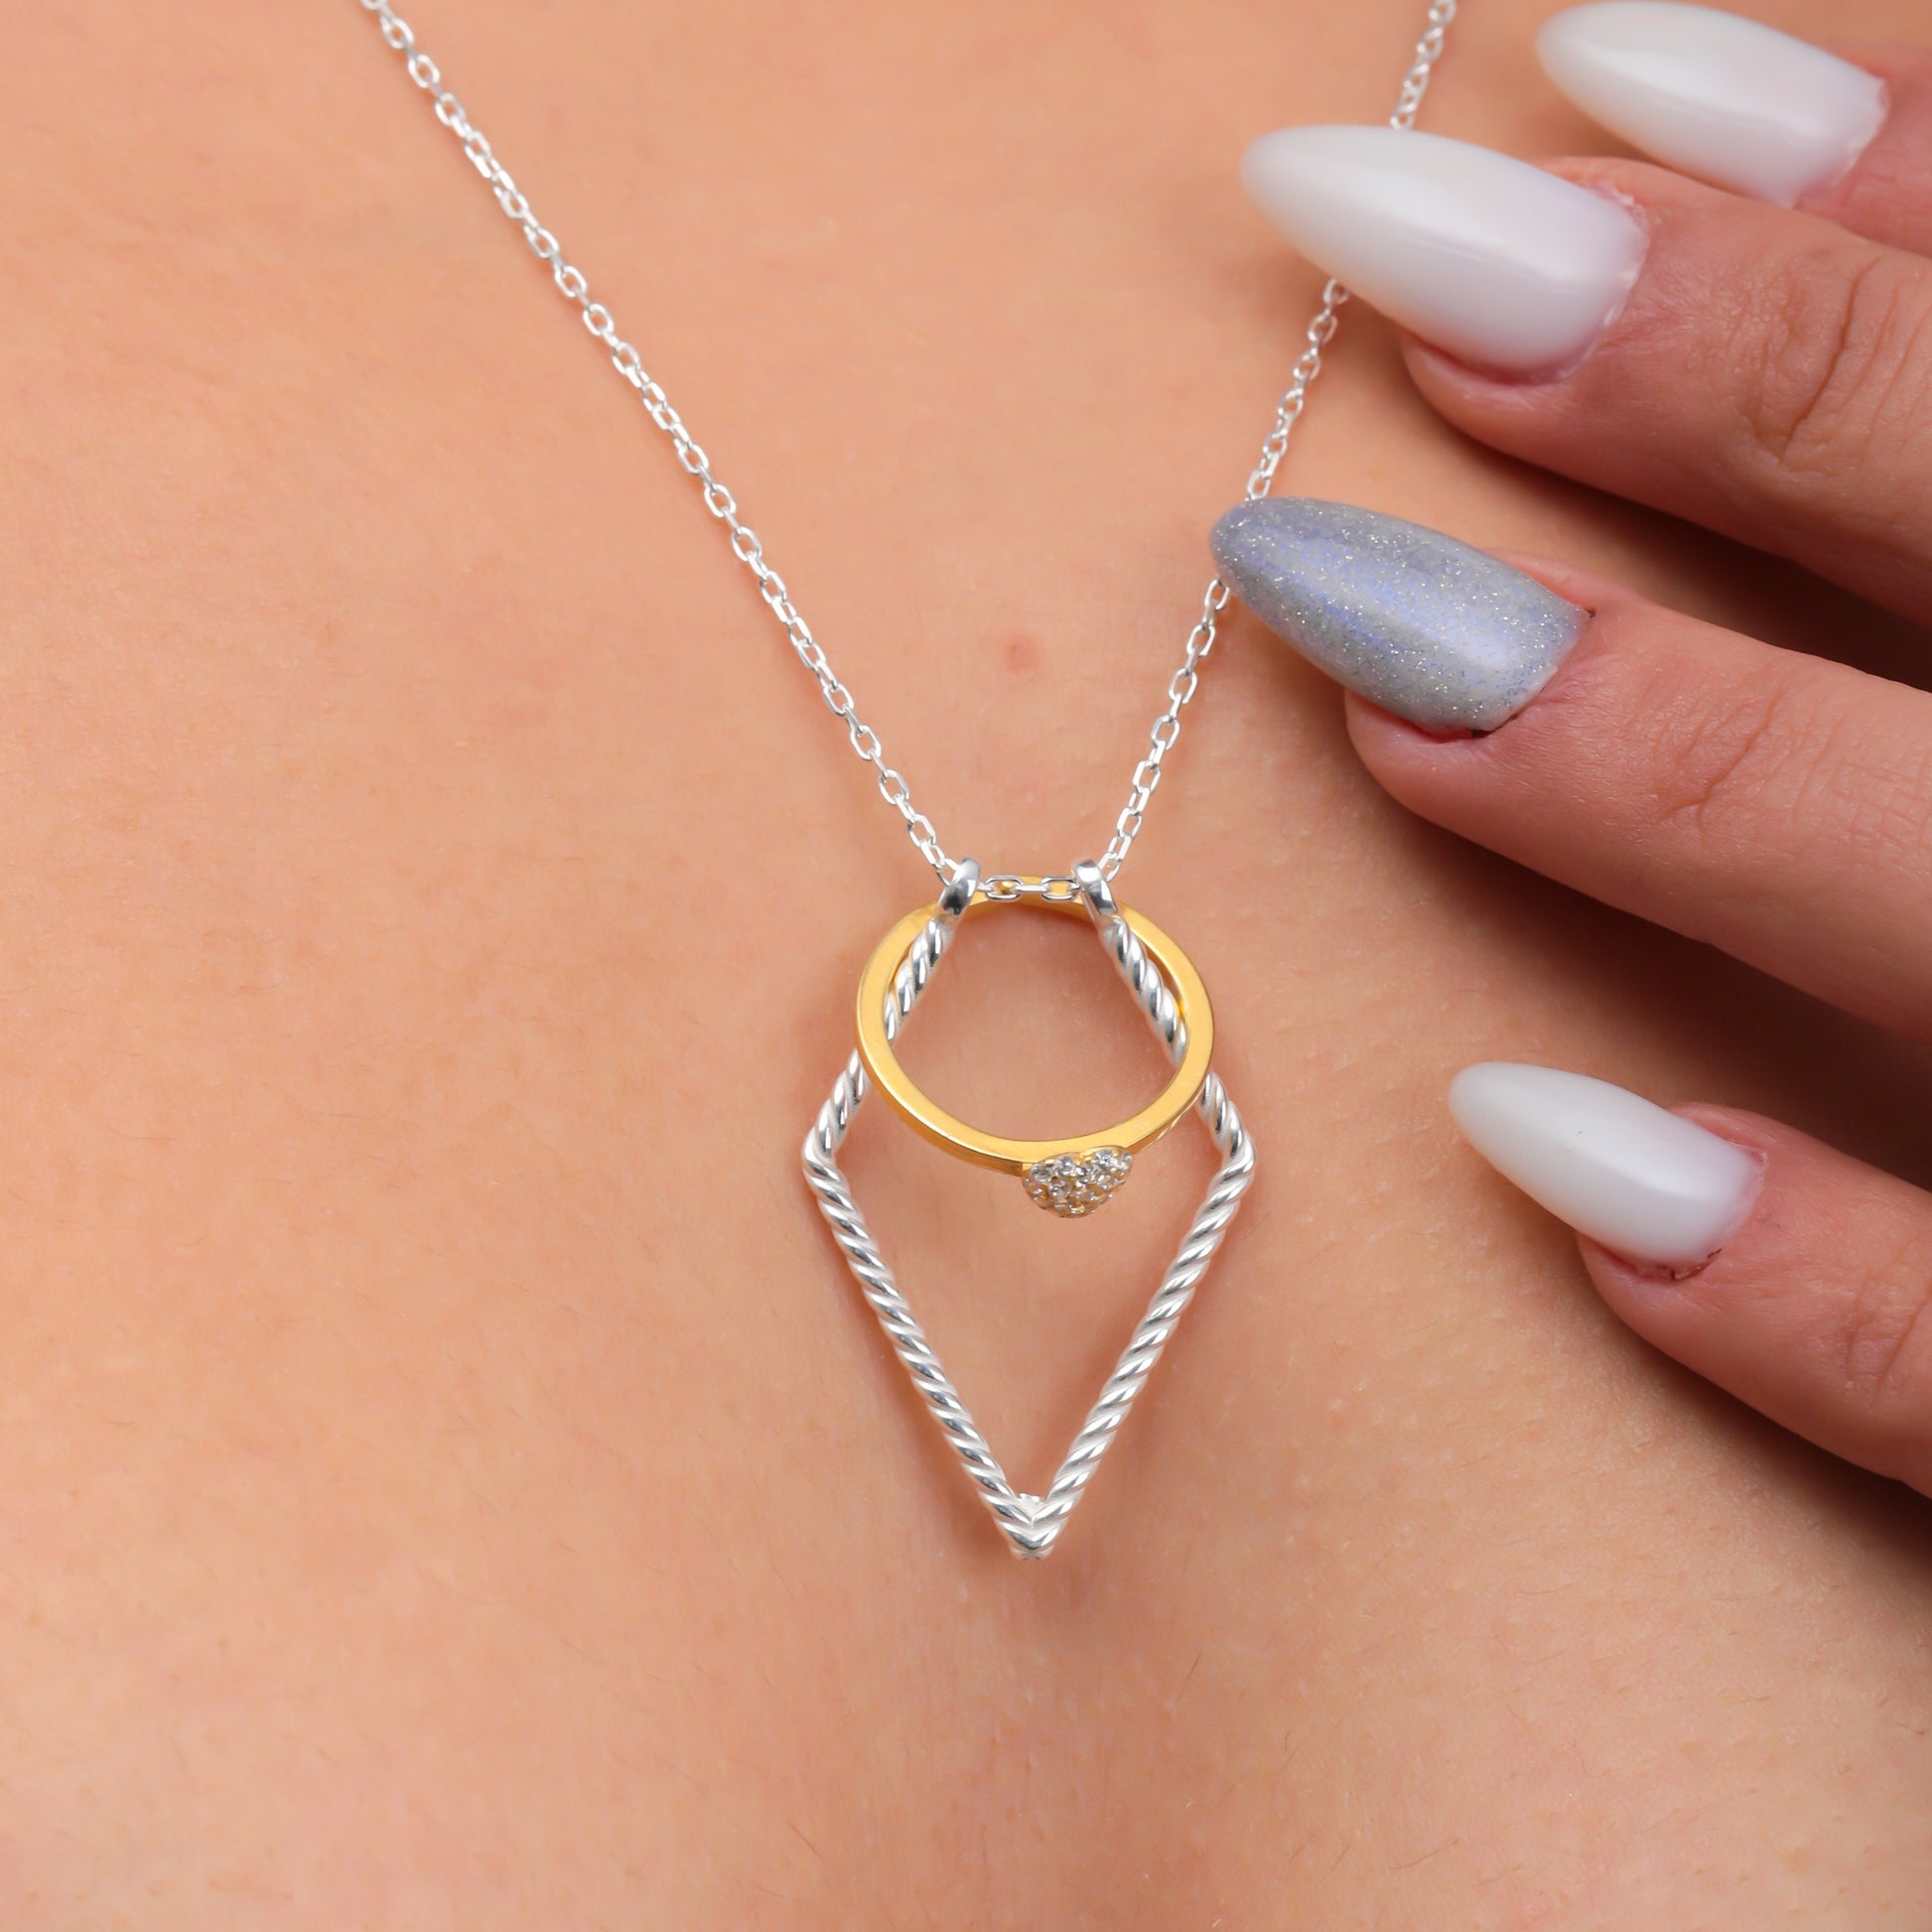 Ring Holder Necklace Geometric Thick Chain Option Ring Keeper Pendant Men Women Ring Holder Necklace Gift for Doctors Nurse Jewelry Sterling Silver /